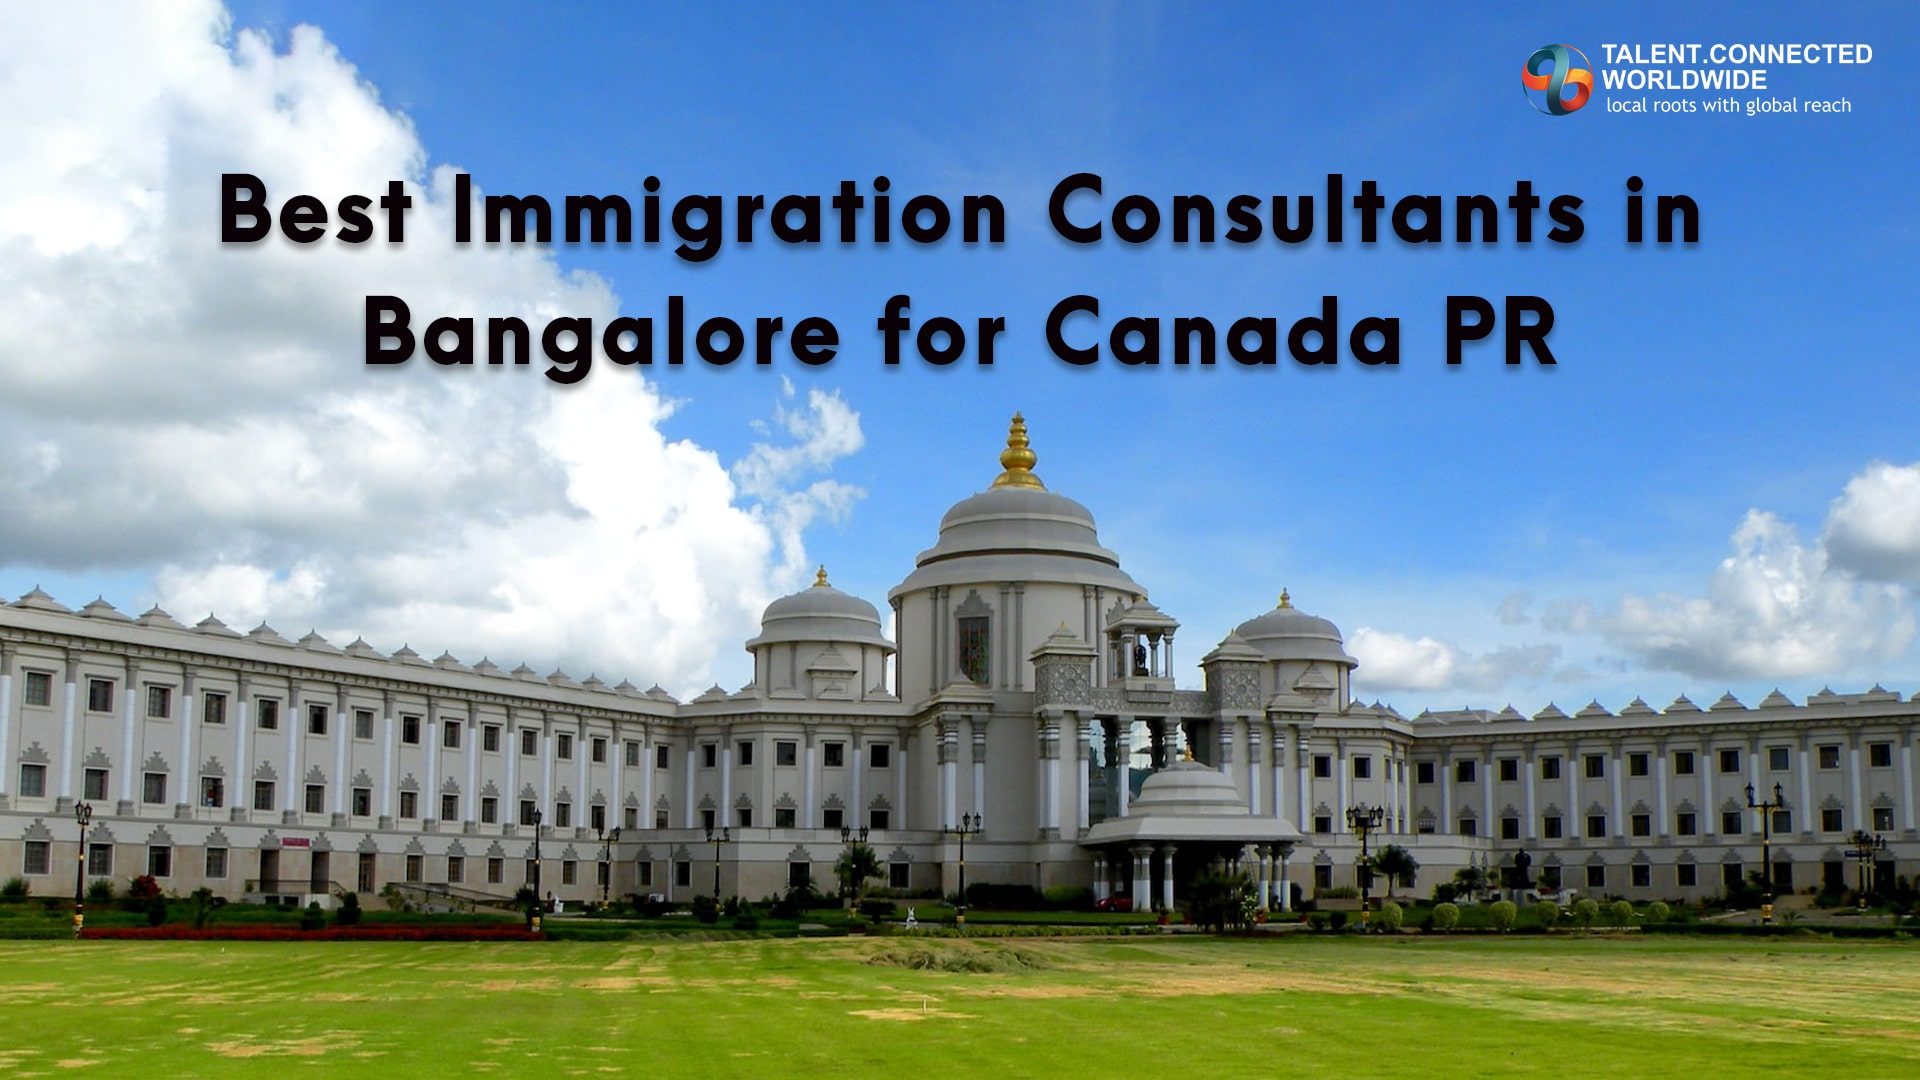 Best Immigration Consultants in Bangalore for Canada PR